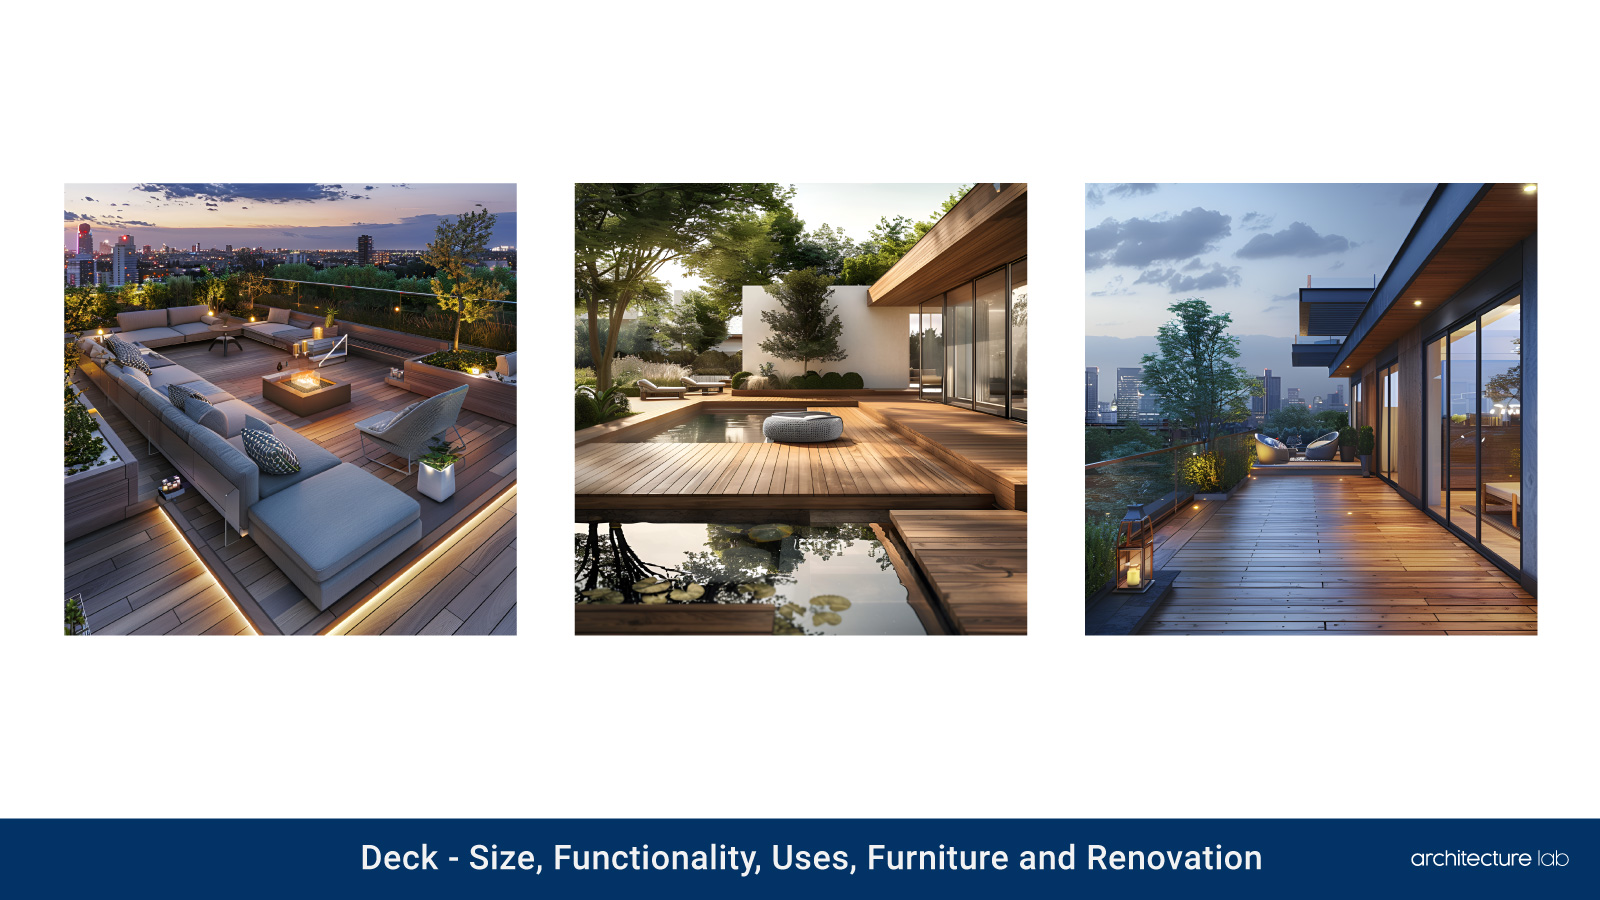 Deck: size, functionality, uses, furniture, and renovation